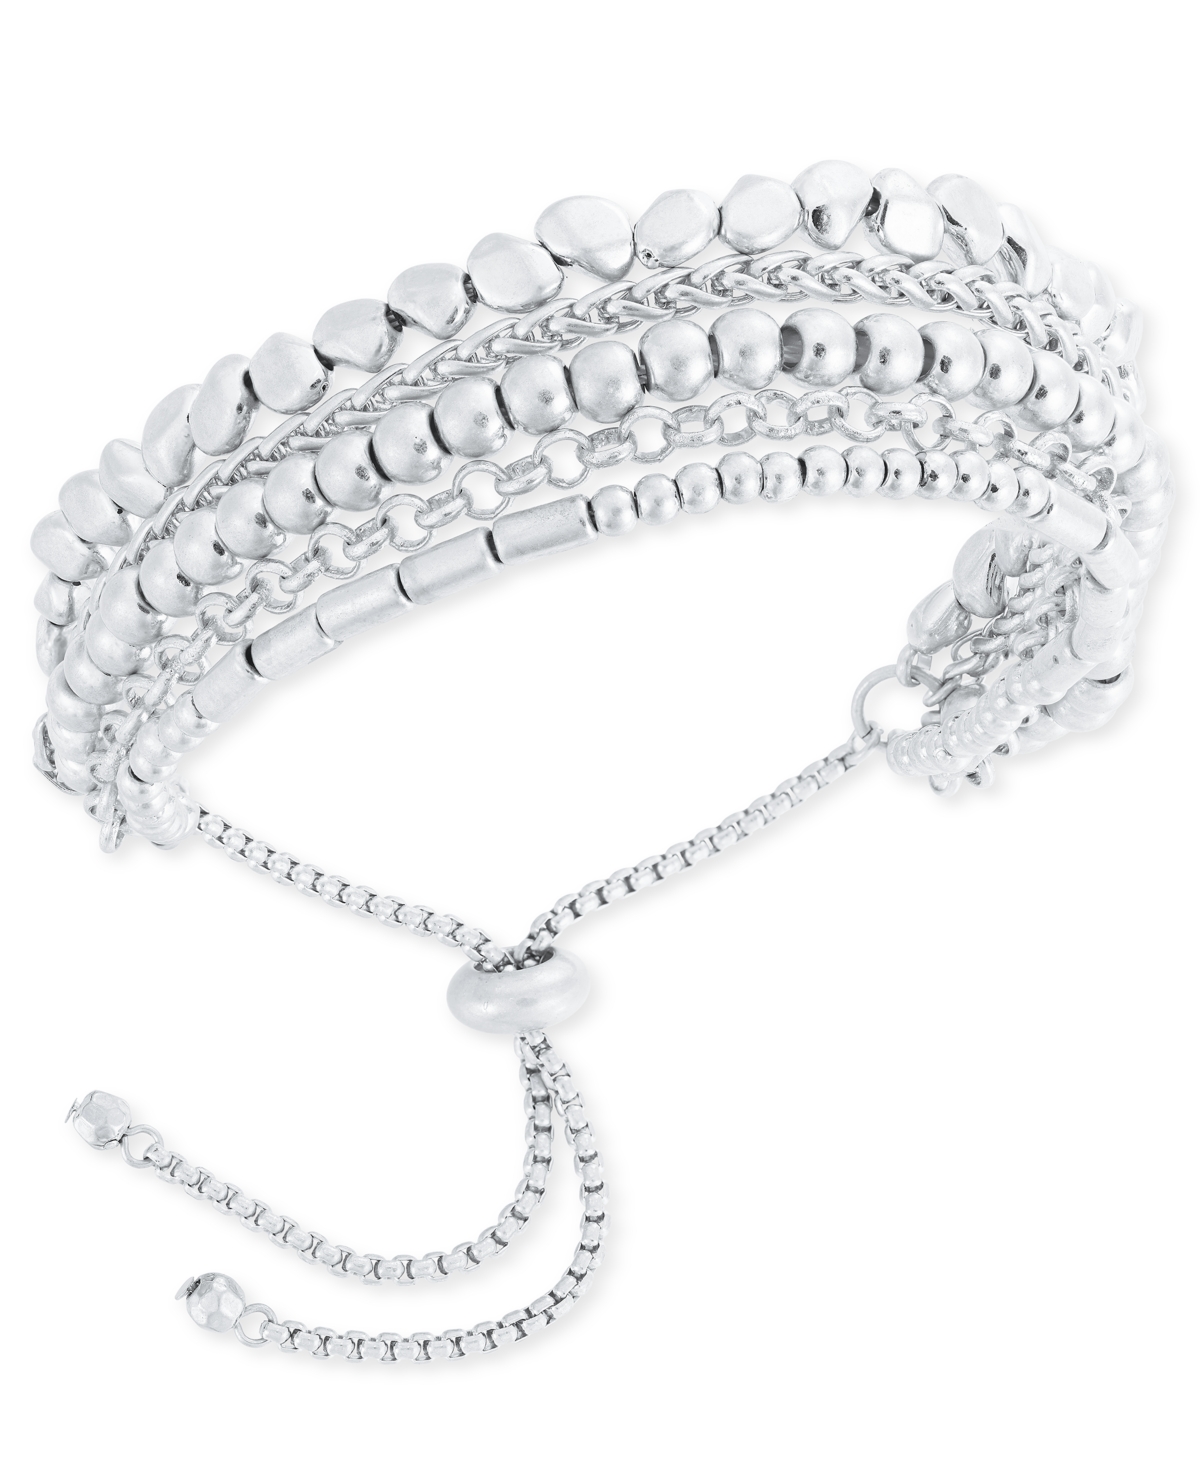 Mixed Bead Statement Slider Bracelet, Created for Macy's - Silver